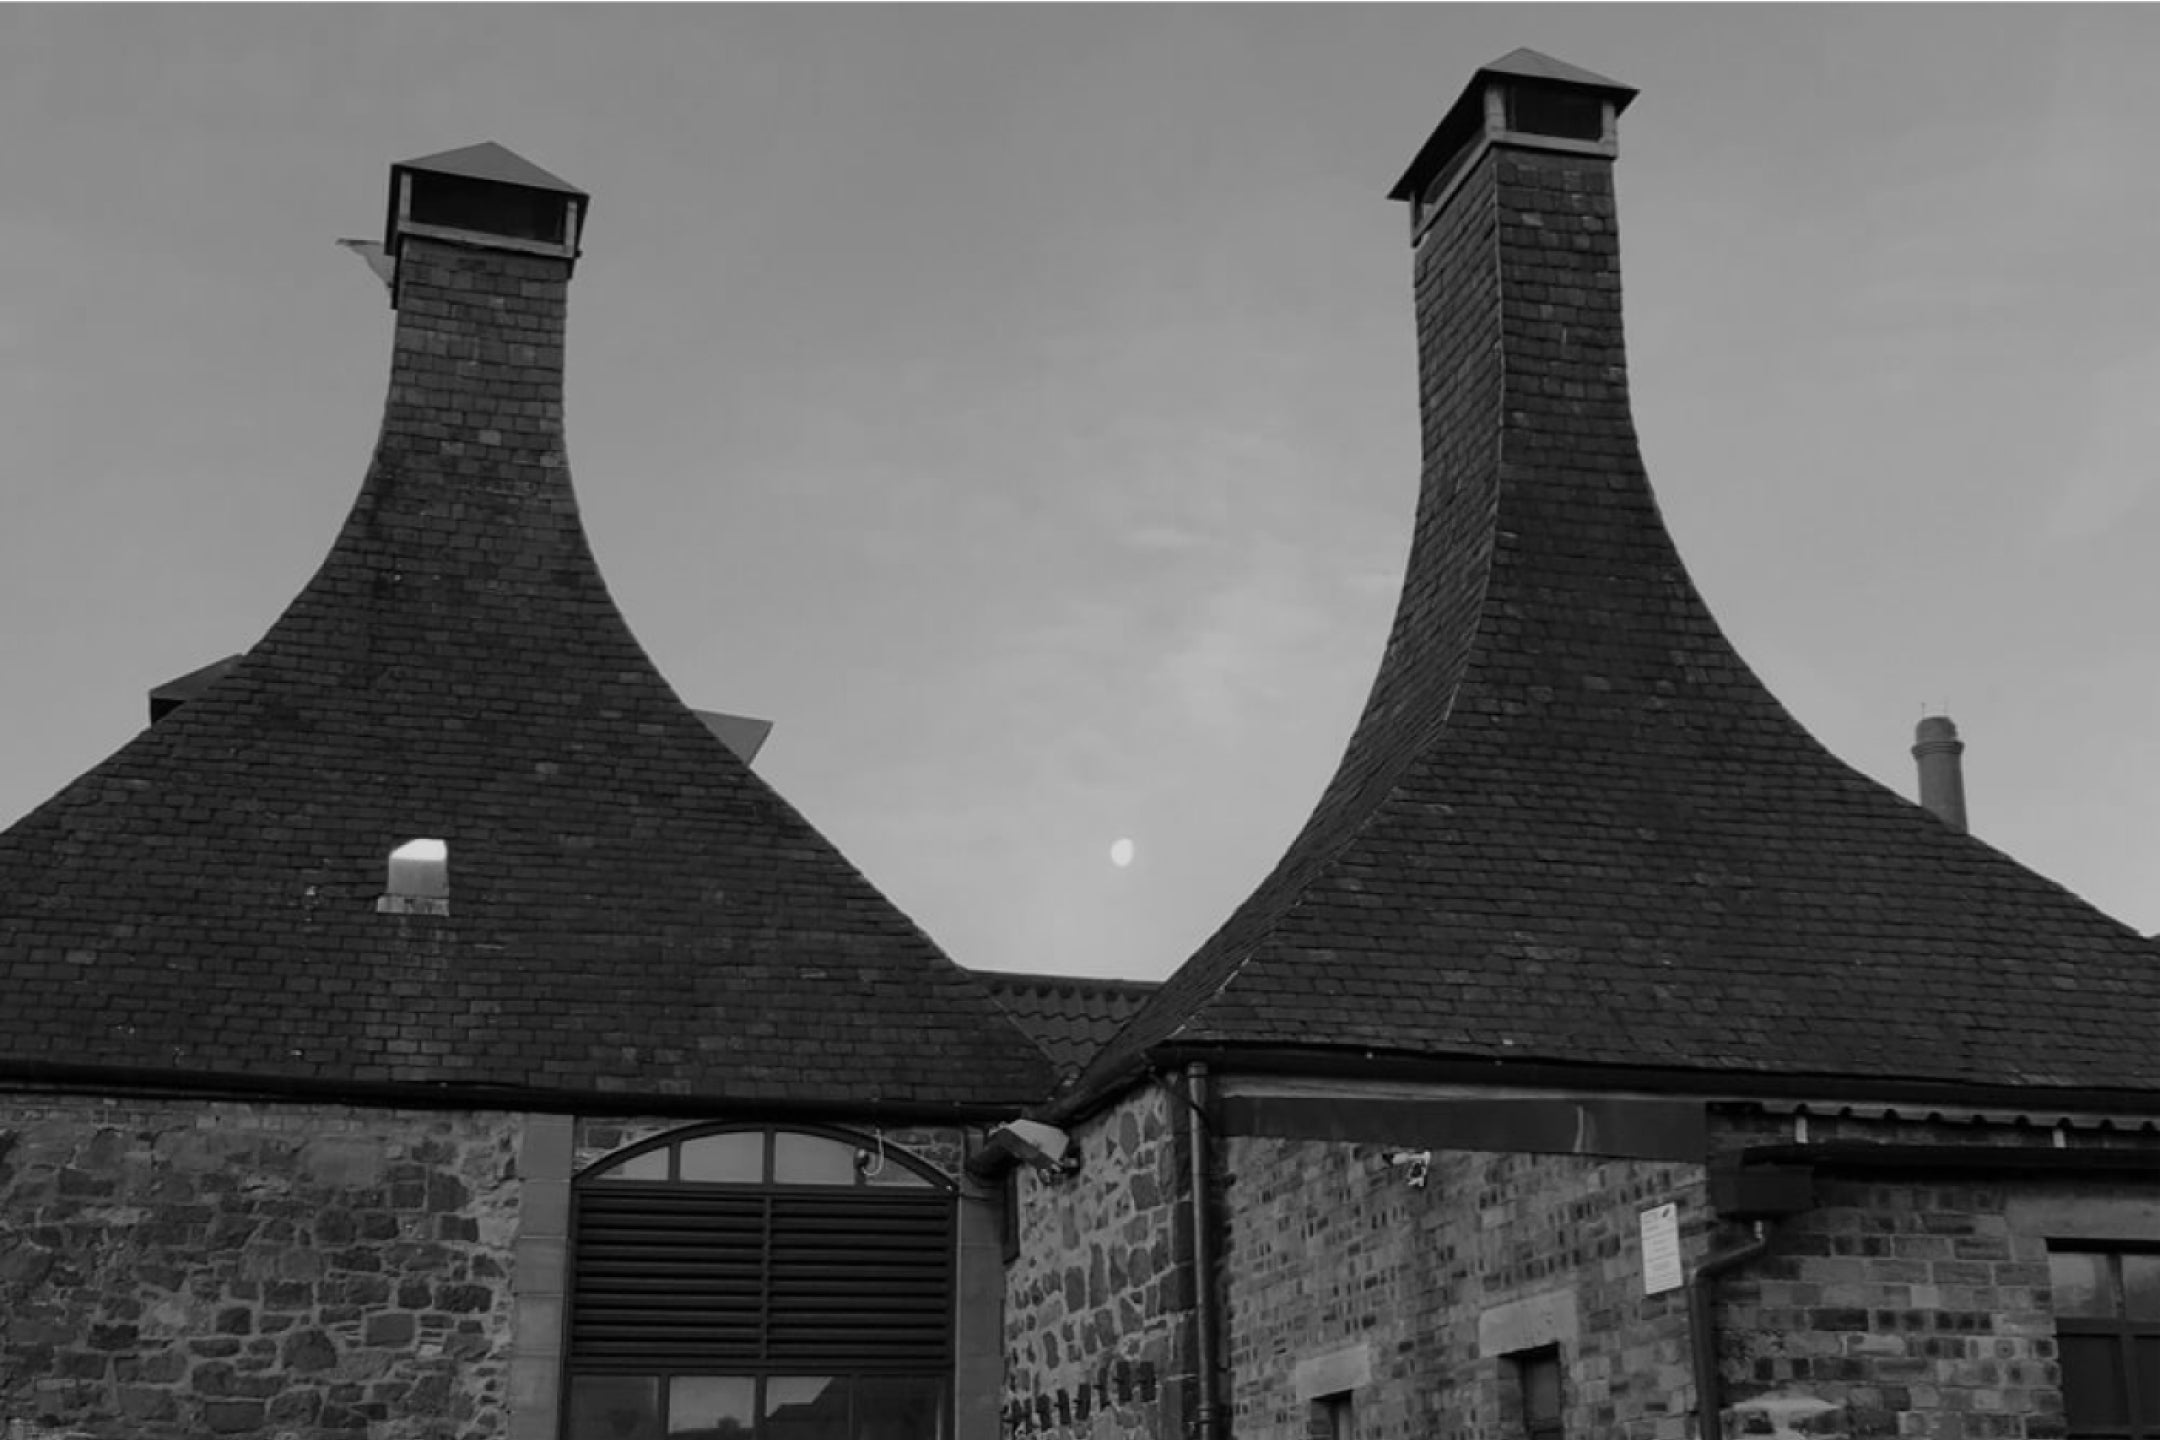 Belhaven brewery building in black and white